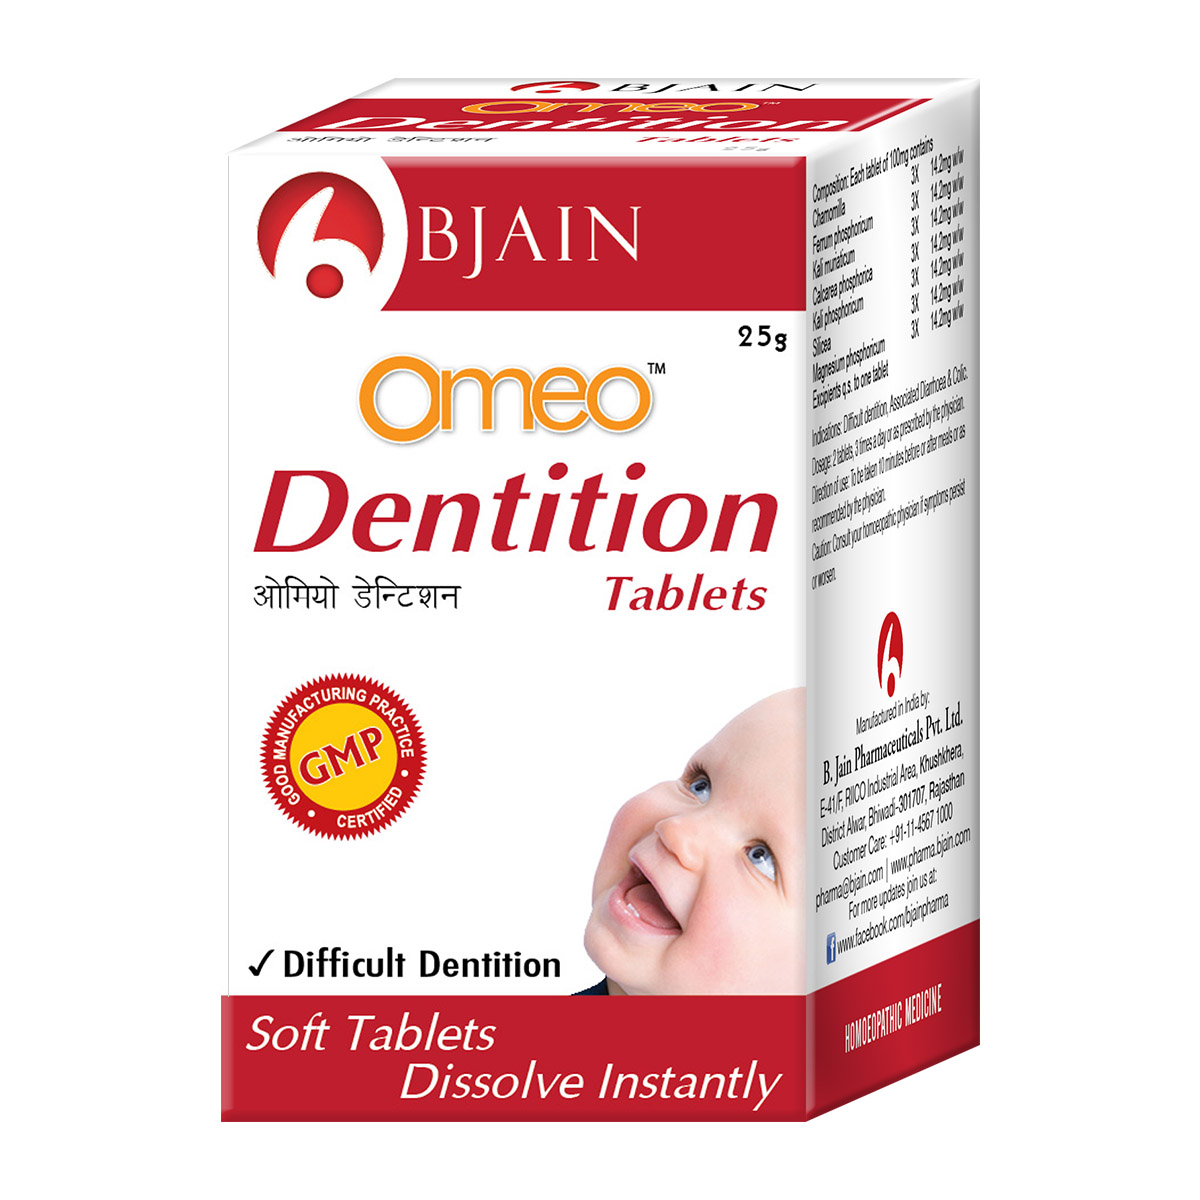 Omeo Dentition Tablets 25GM